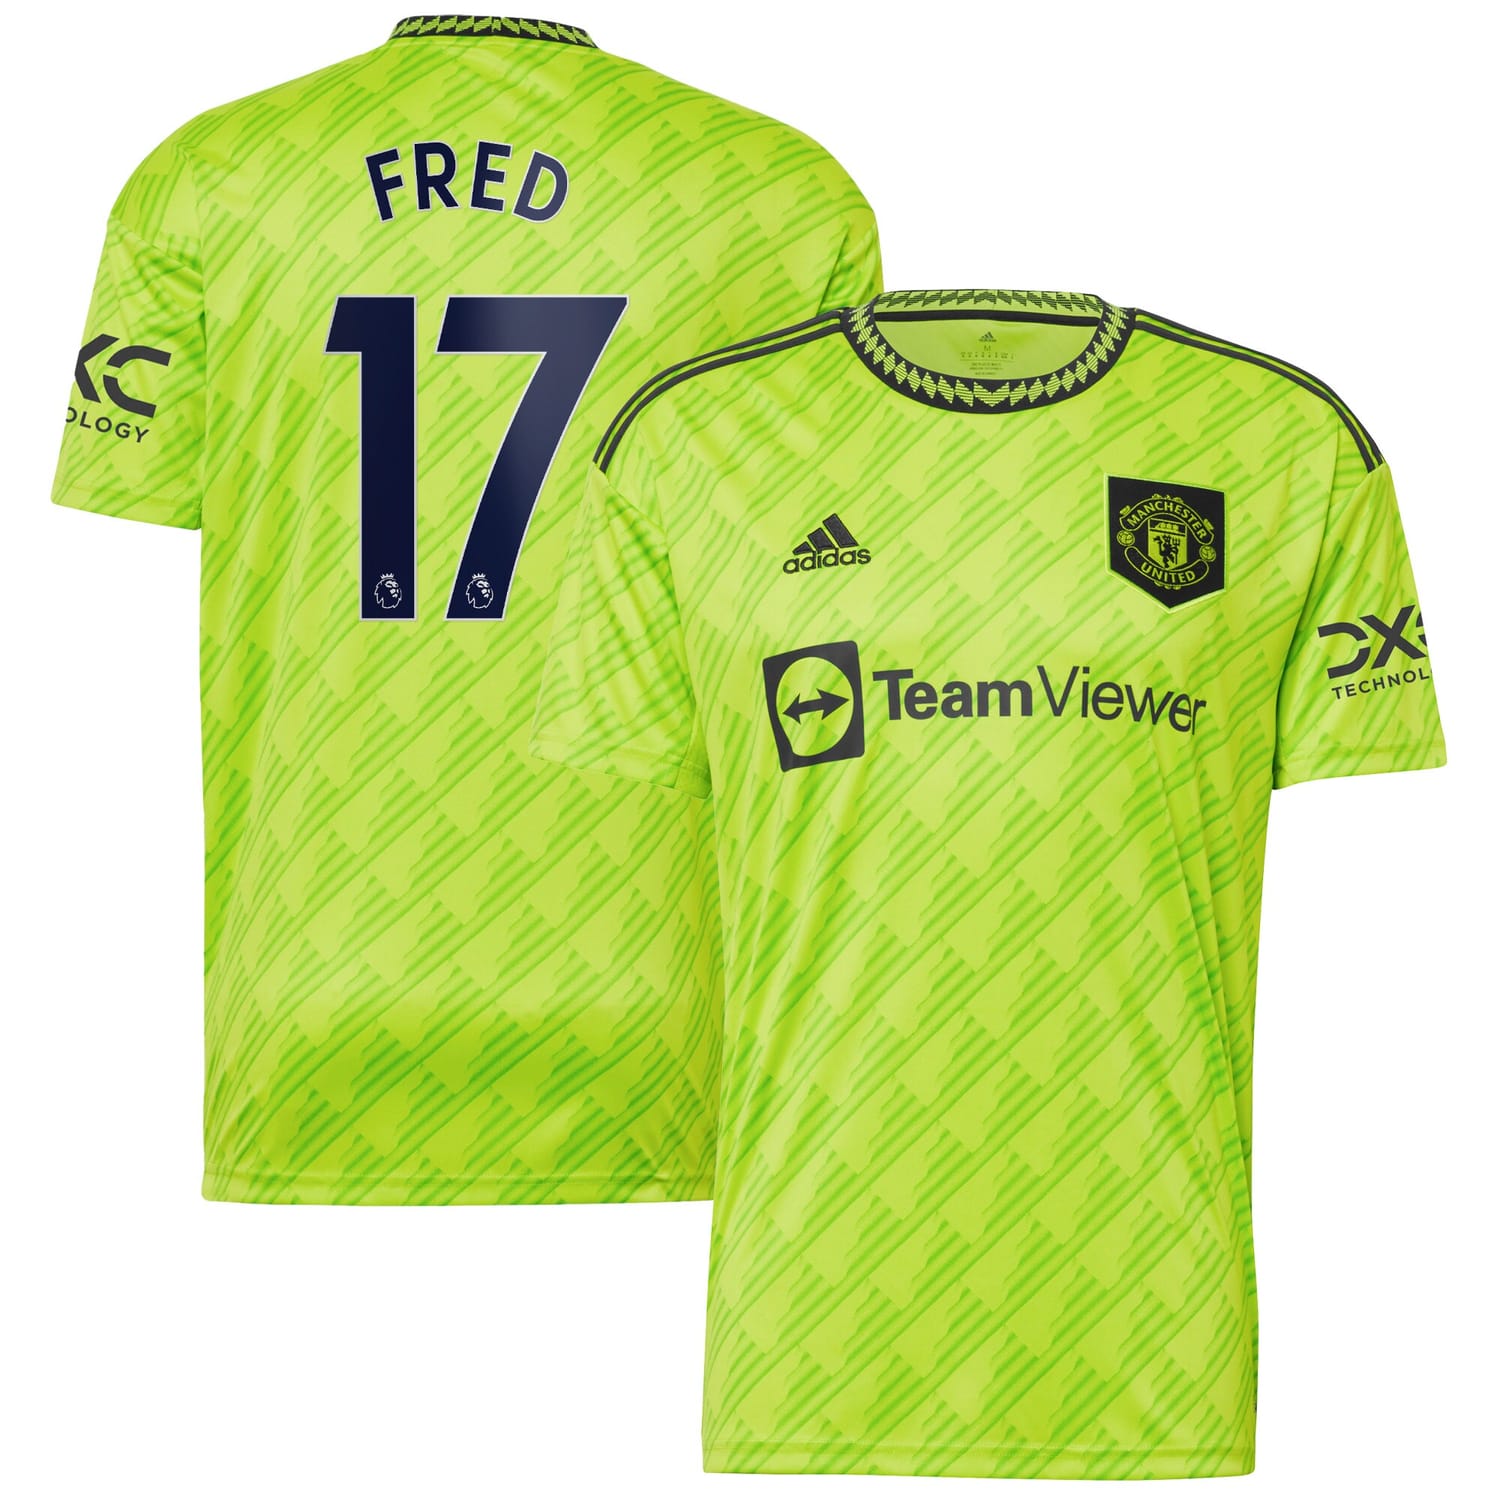 Premier League Manchester United Third Jersey Shirt Neon Green 2022-23 player Fred printing for Men